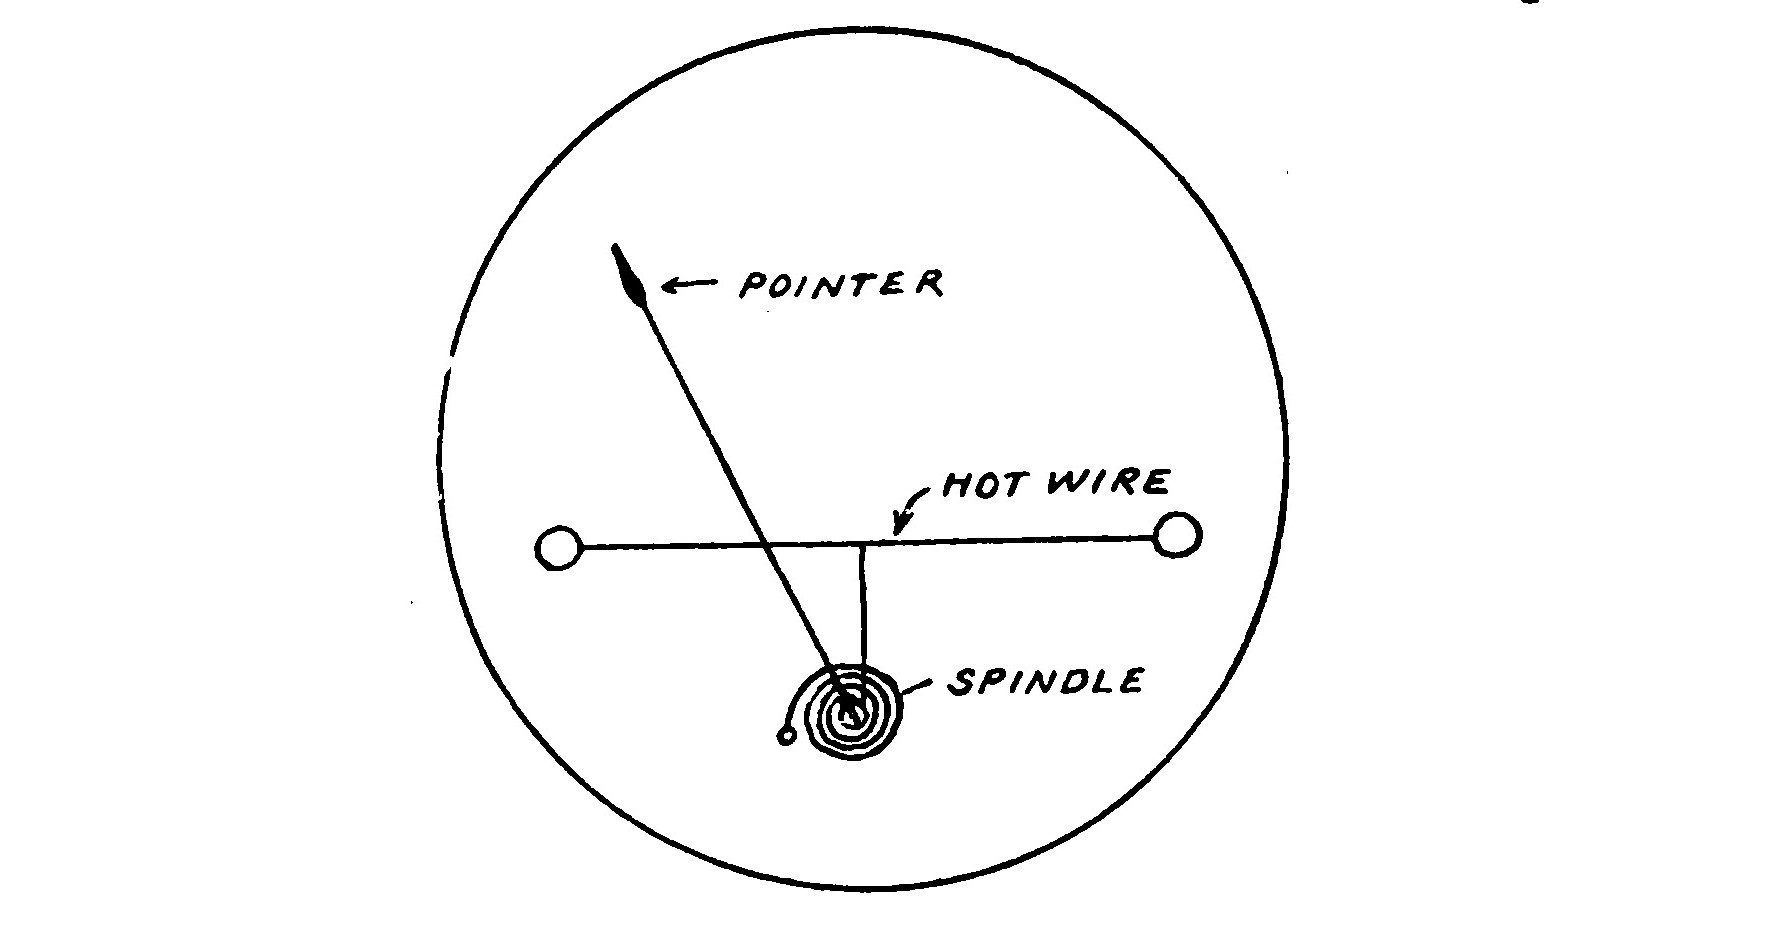 FIG 58. Diagram showing the Constructive Principle of a Hot Wire Ammeter.